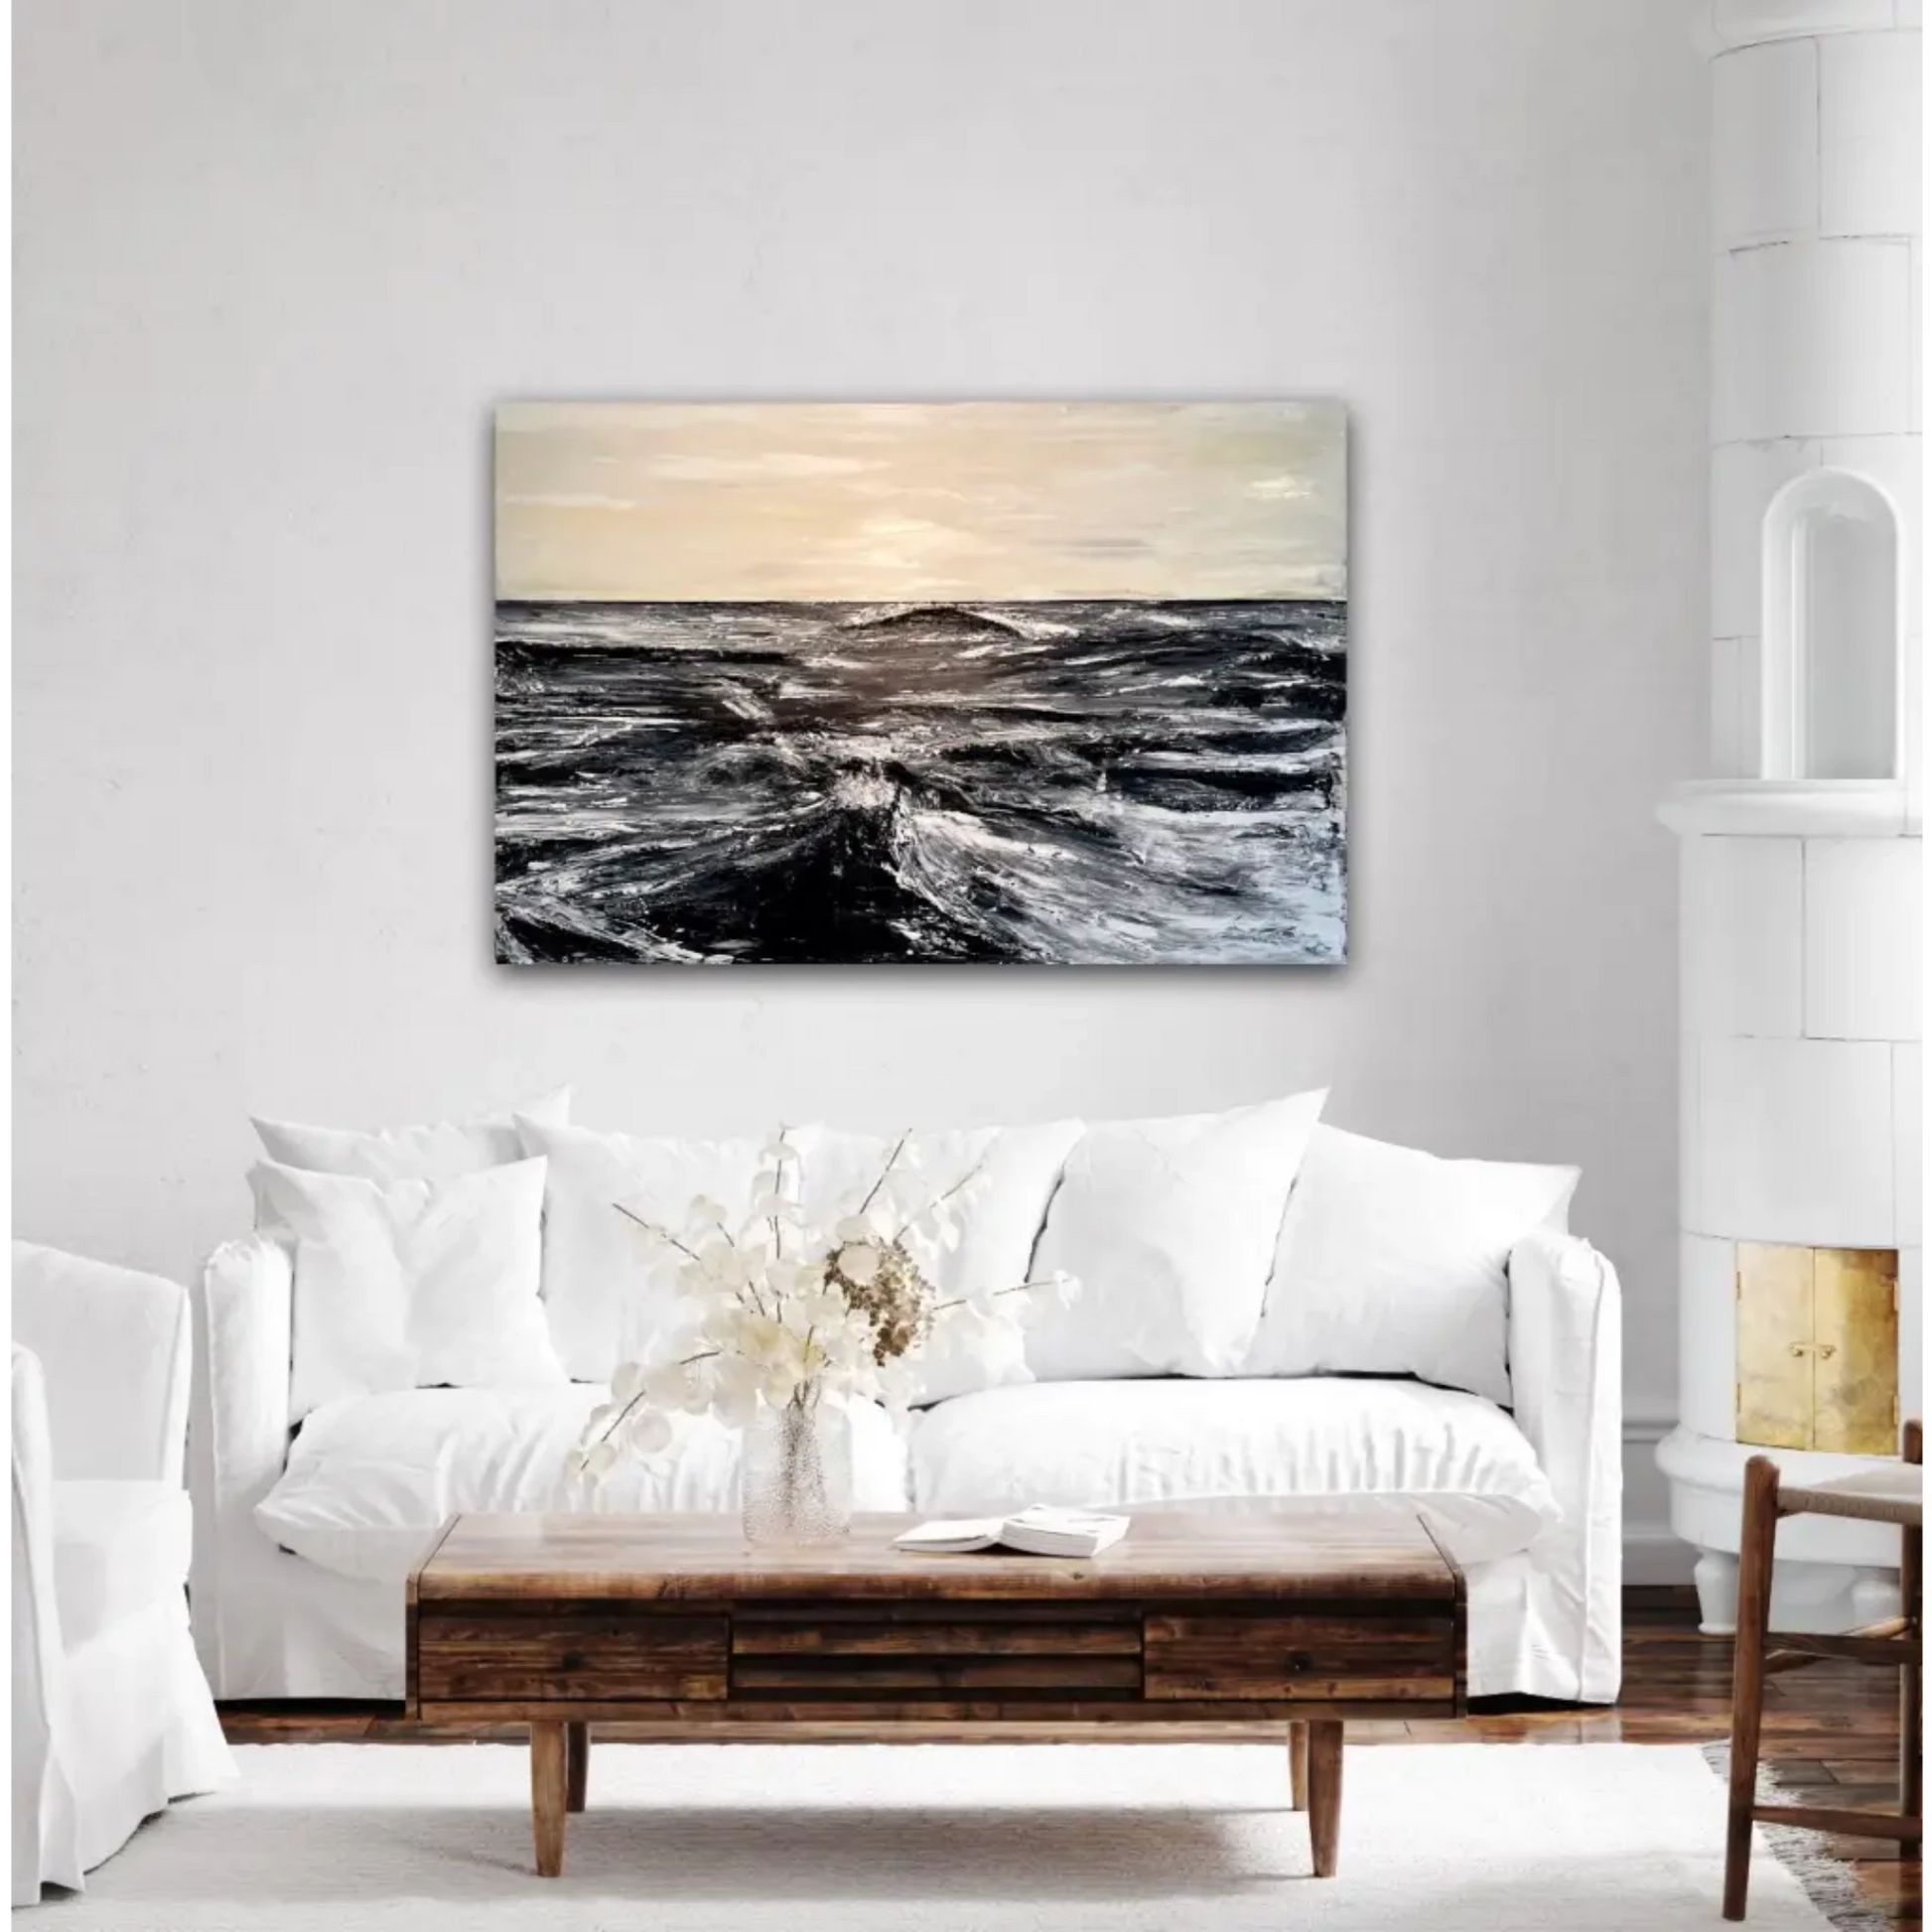 Rough Waters - Caroline Adrienne Art abstract art texture wall art white minimal art wall art wall decor home design home decor texture wall art fine art abstract white cream beige taupe oversized large wall art original art painting canvas painting handmade luxury high end hotel interior caroline adrienne art original oil painting on canvas